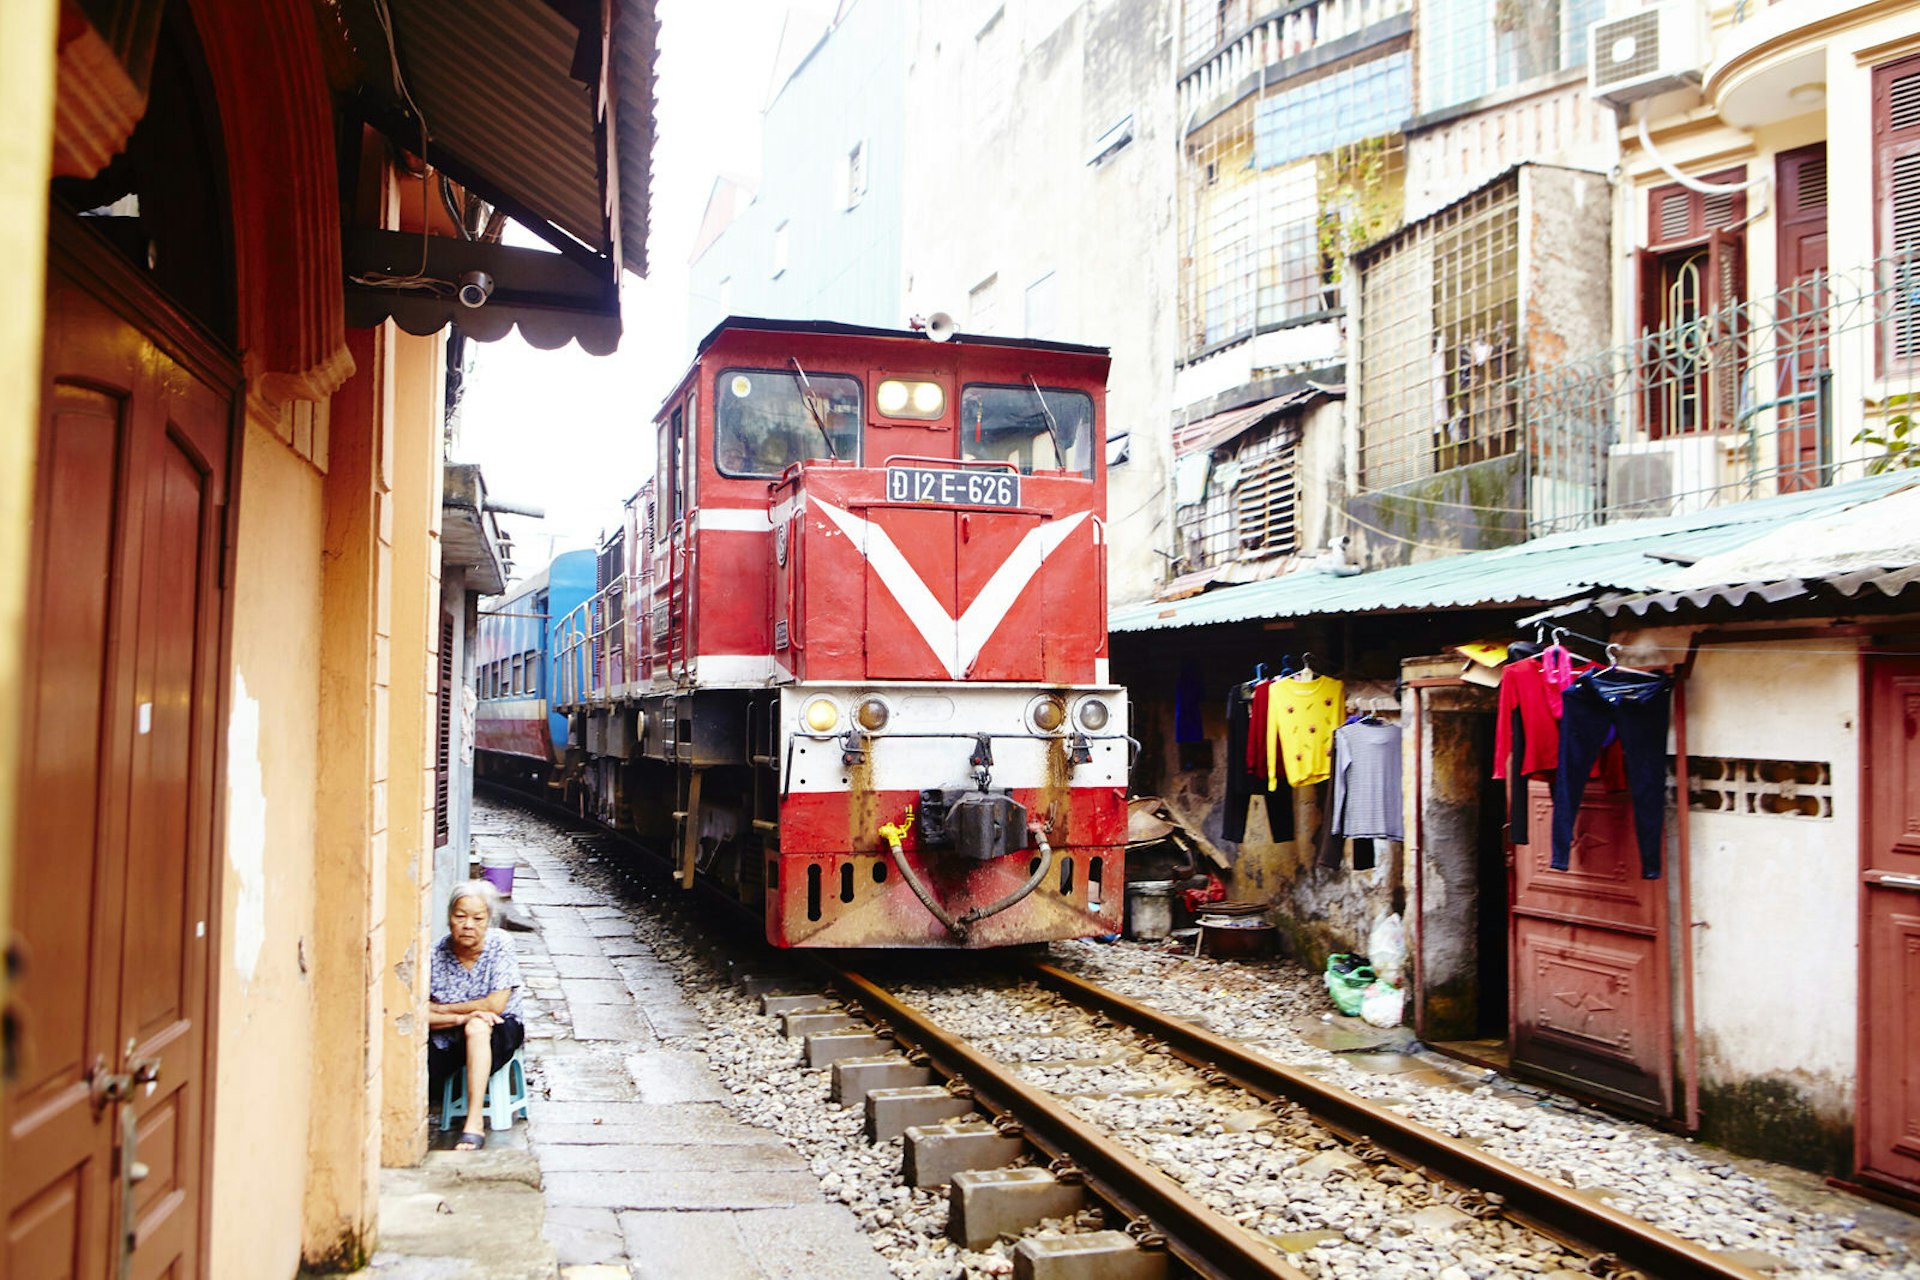 The Reunification Express edging past houses in the backstreets of Hanoi’s Old Quarter © Matt Munro / Lonely Planet